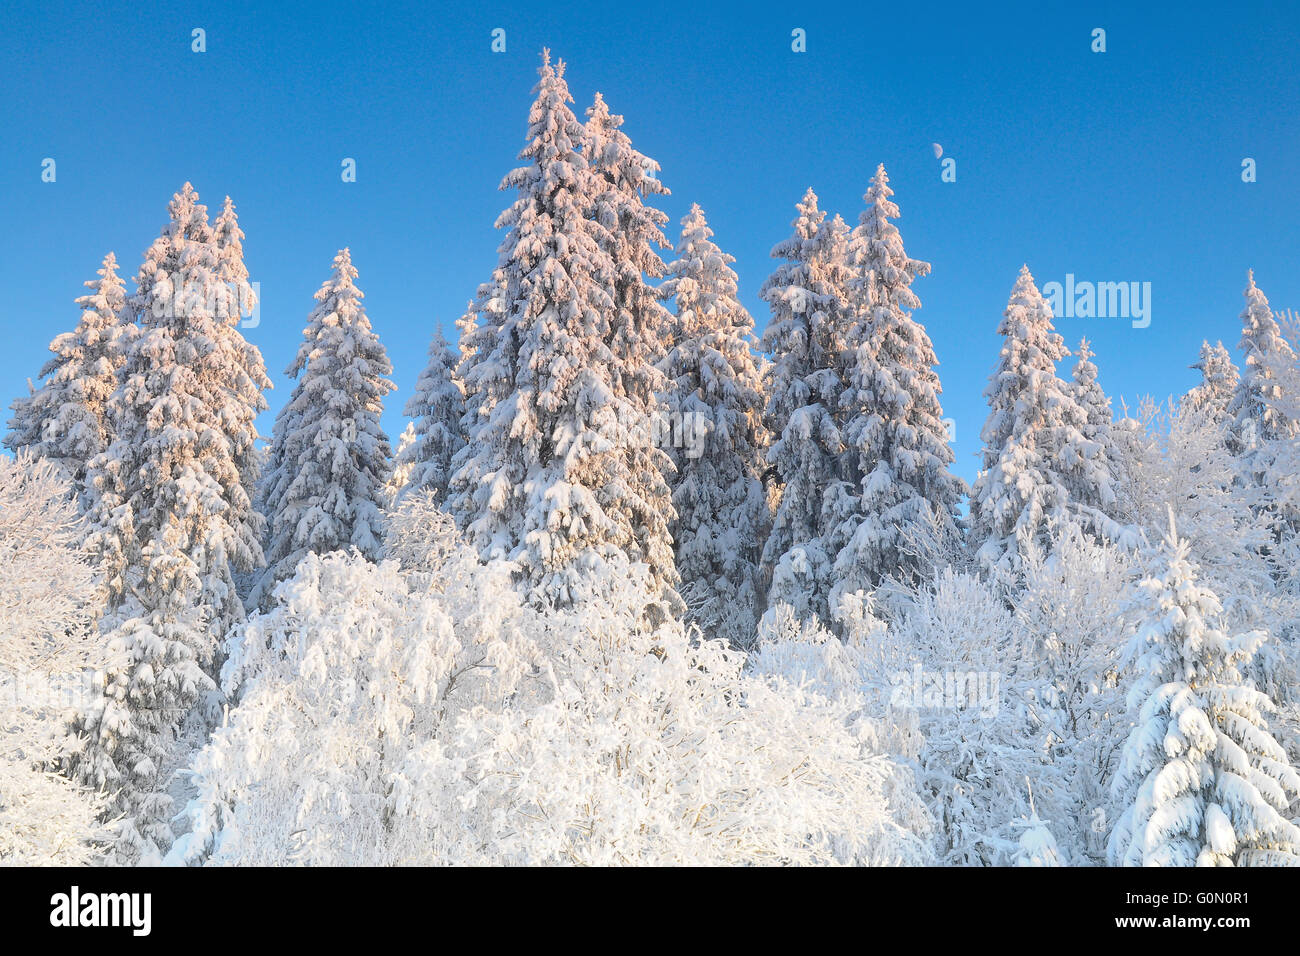 Snowy spruce trees in winter Stock Photo